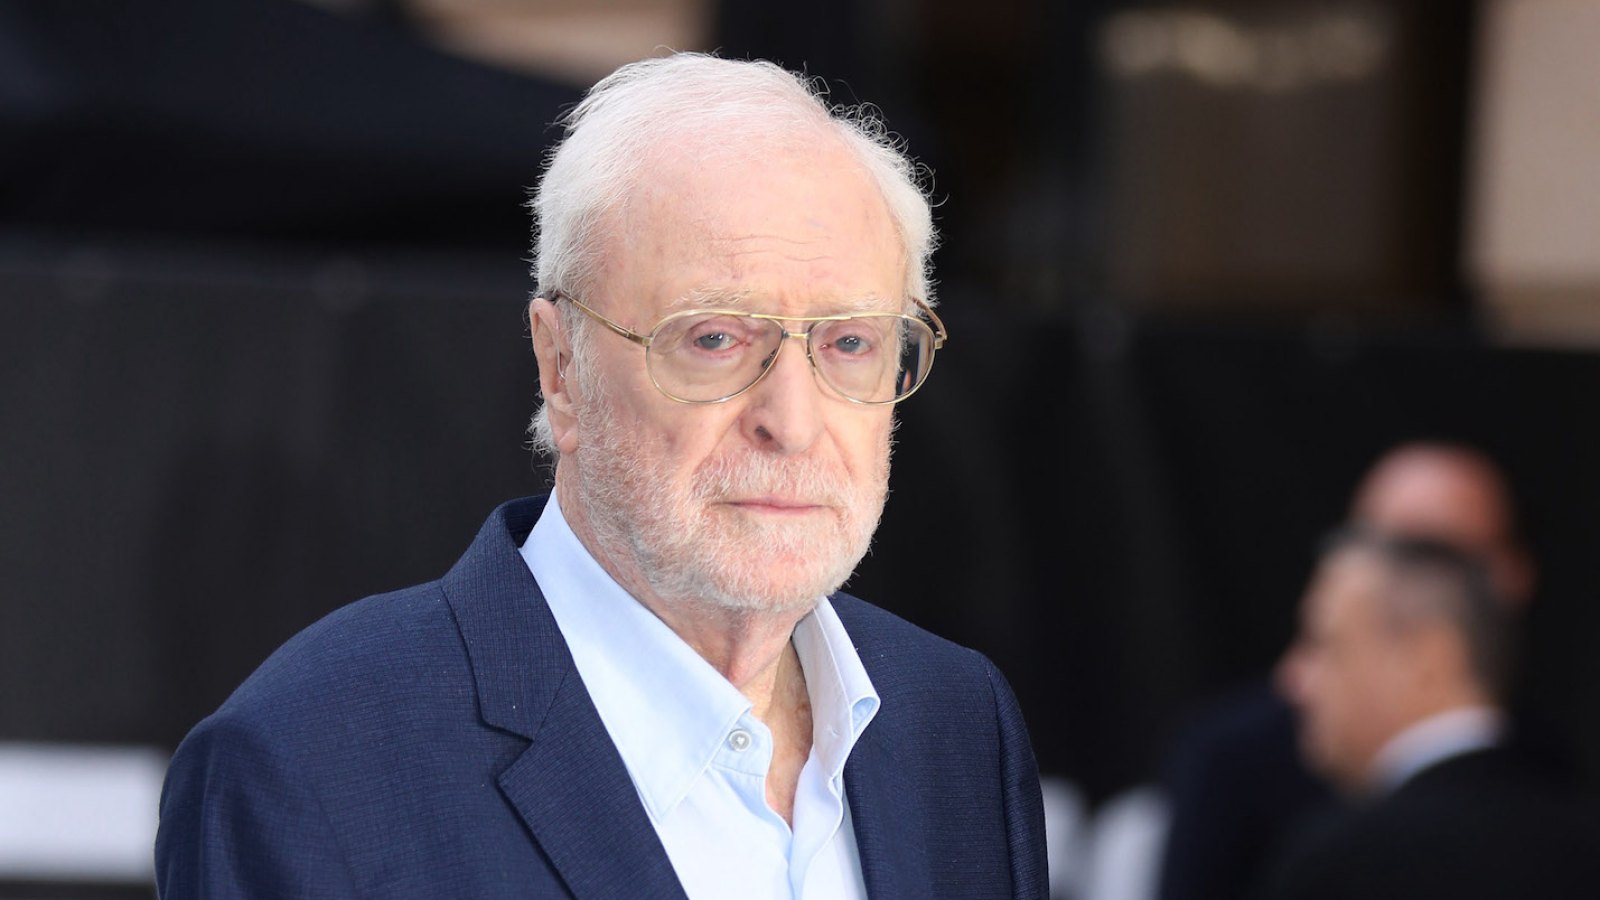 Michael Caine Makes Controversial Comment About Intimacy